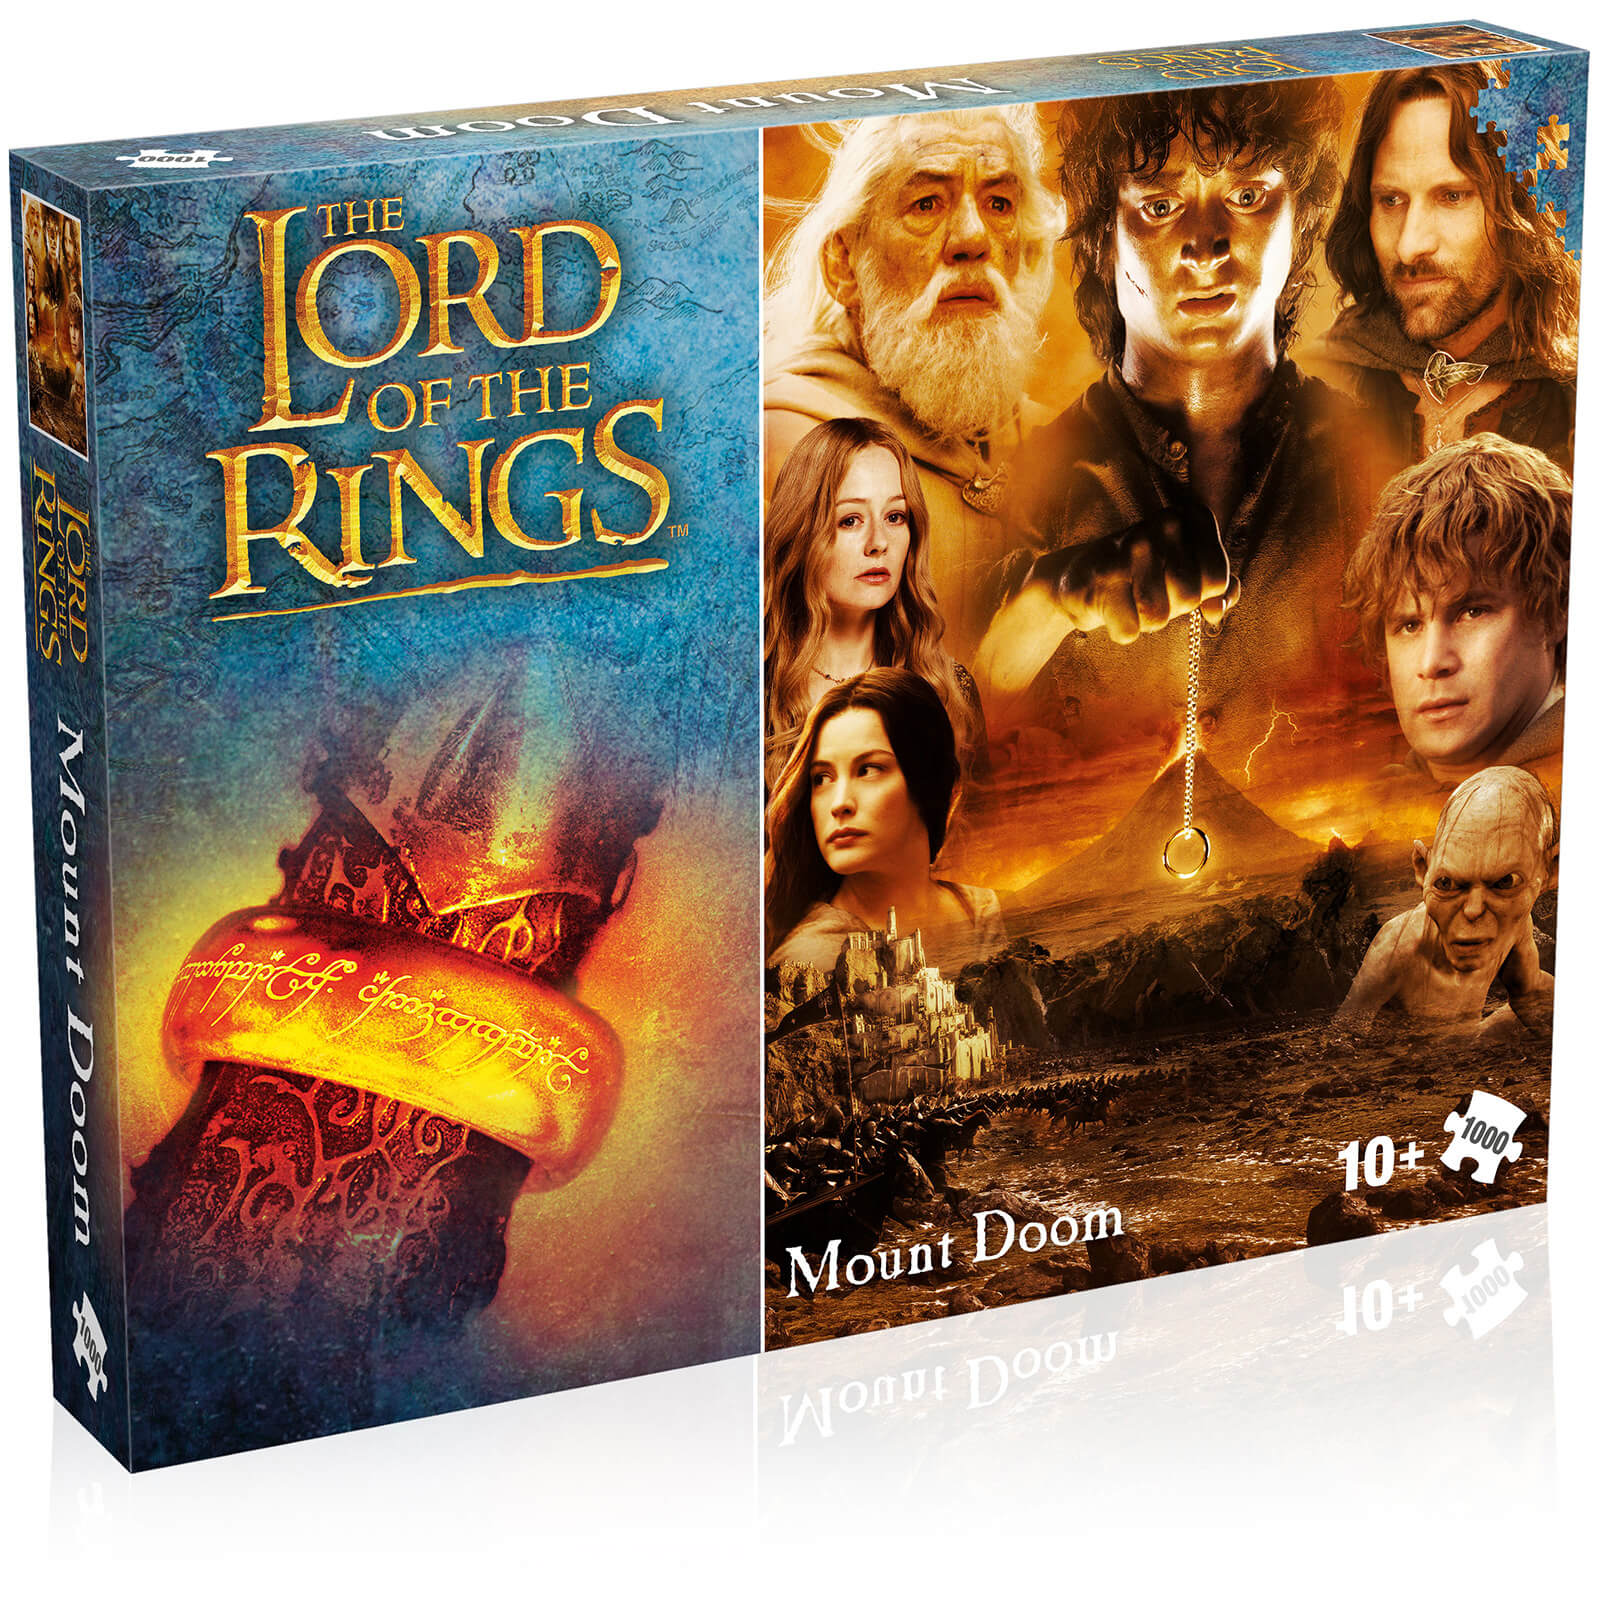 1000 Piece Jigsaw Puzzle - Lord of the Rings Mount Doom Edition